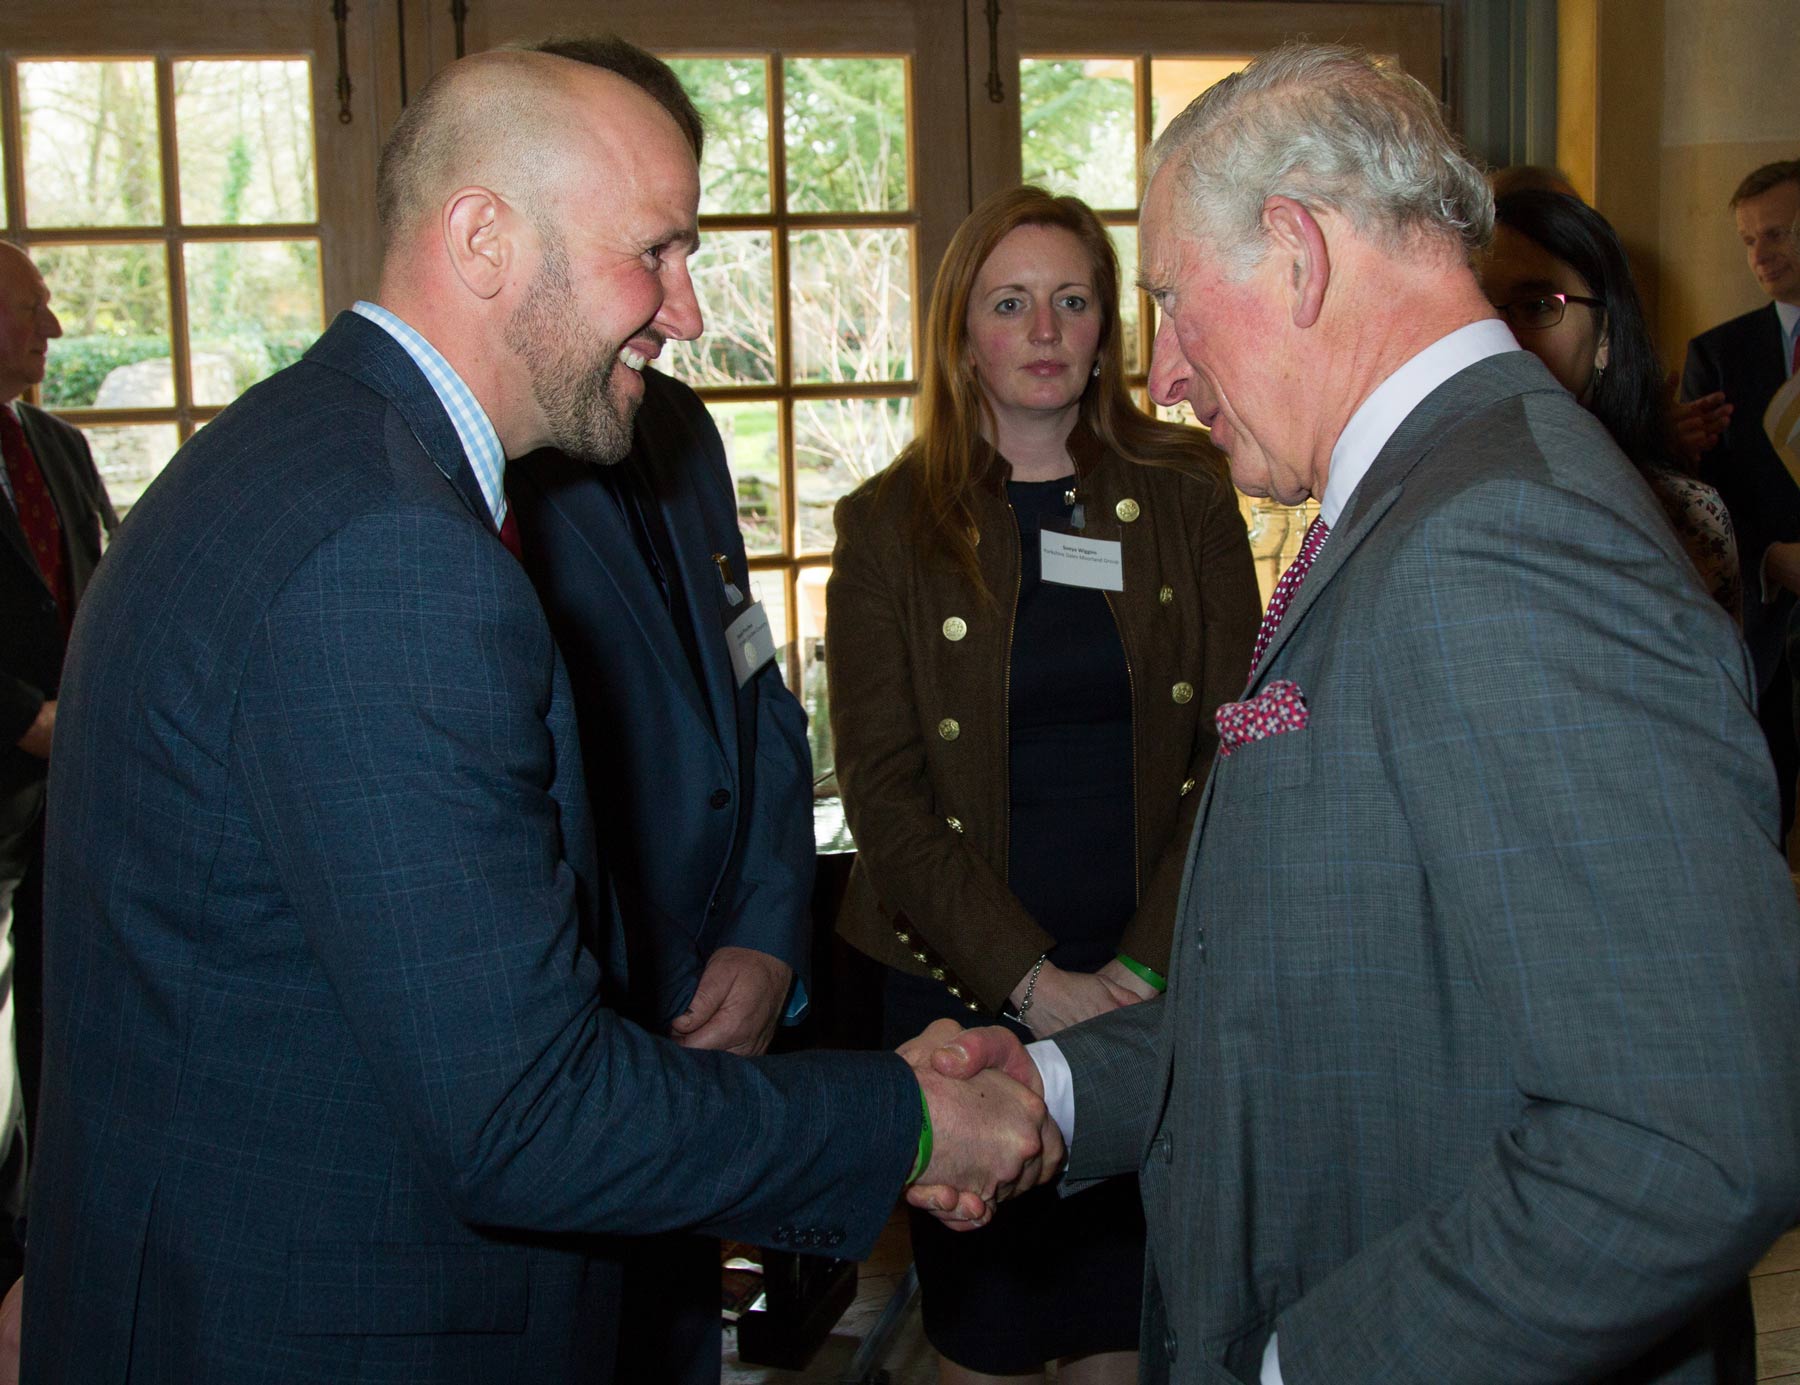 Gamekeeper Ian Sleightholm shaking the hand of HRH The Prince of Wales, Prince Charles with Sonya Wiggins in the background